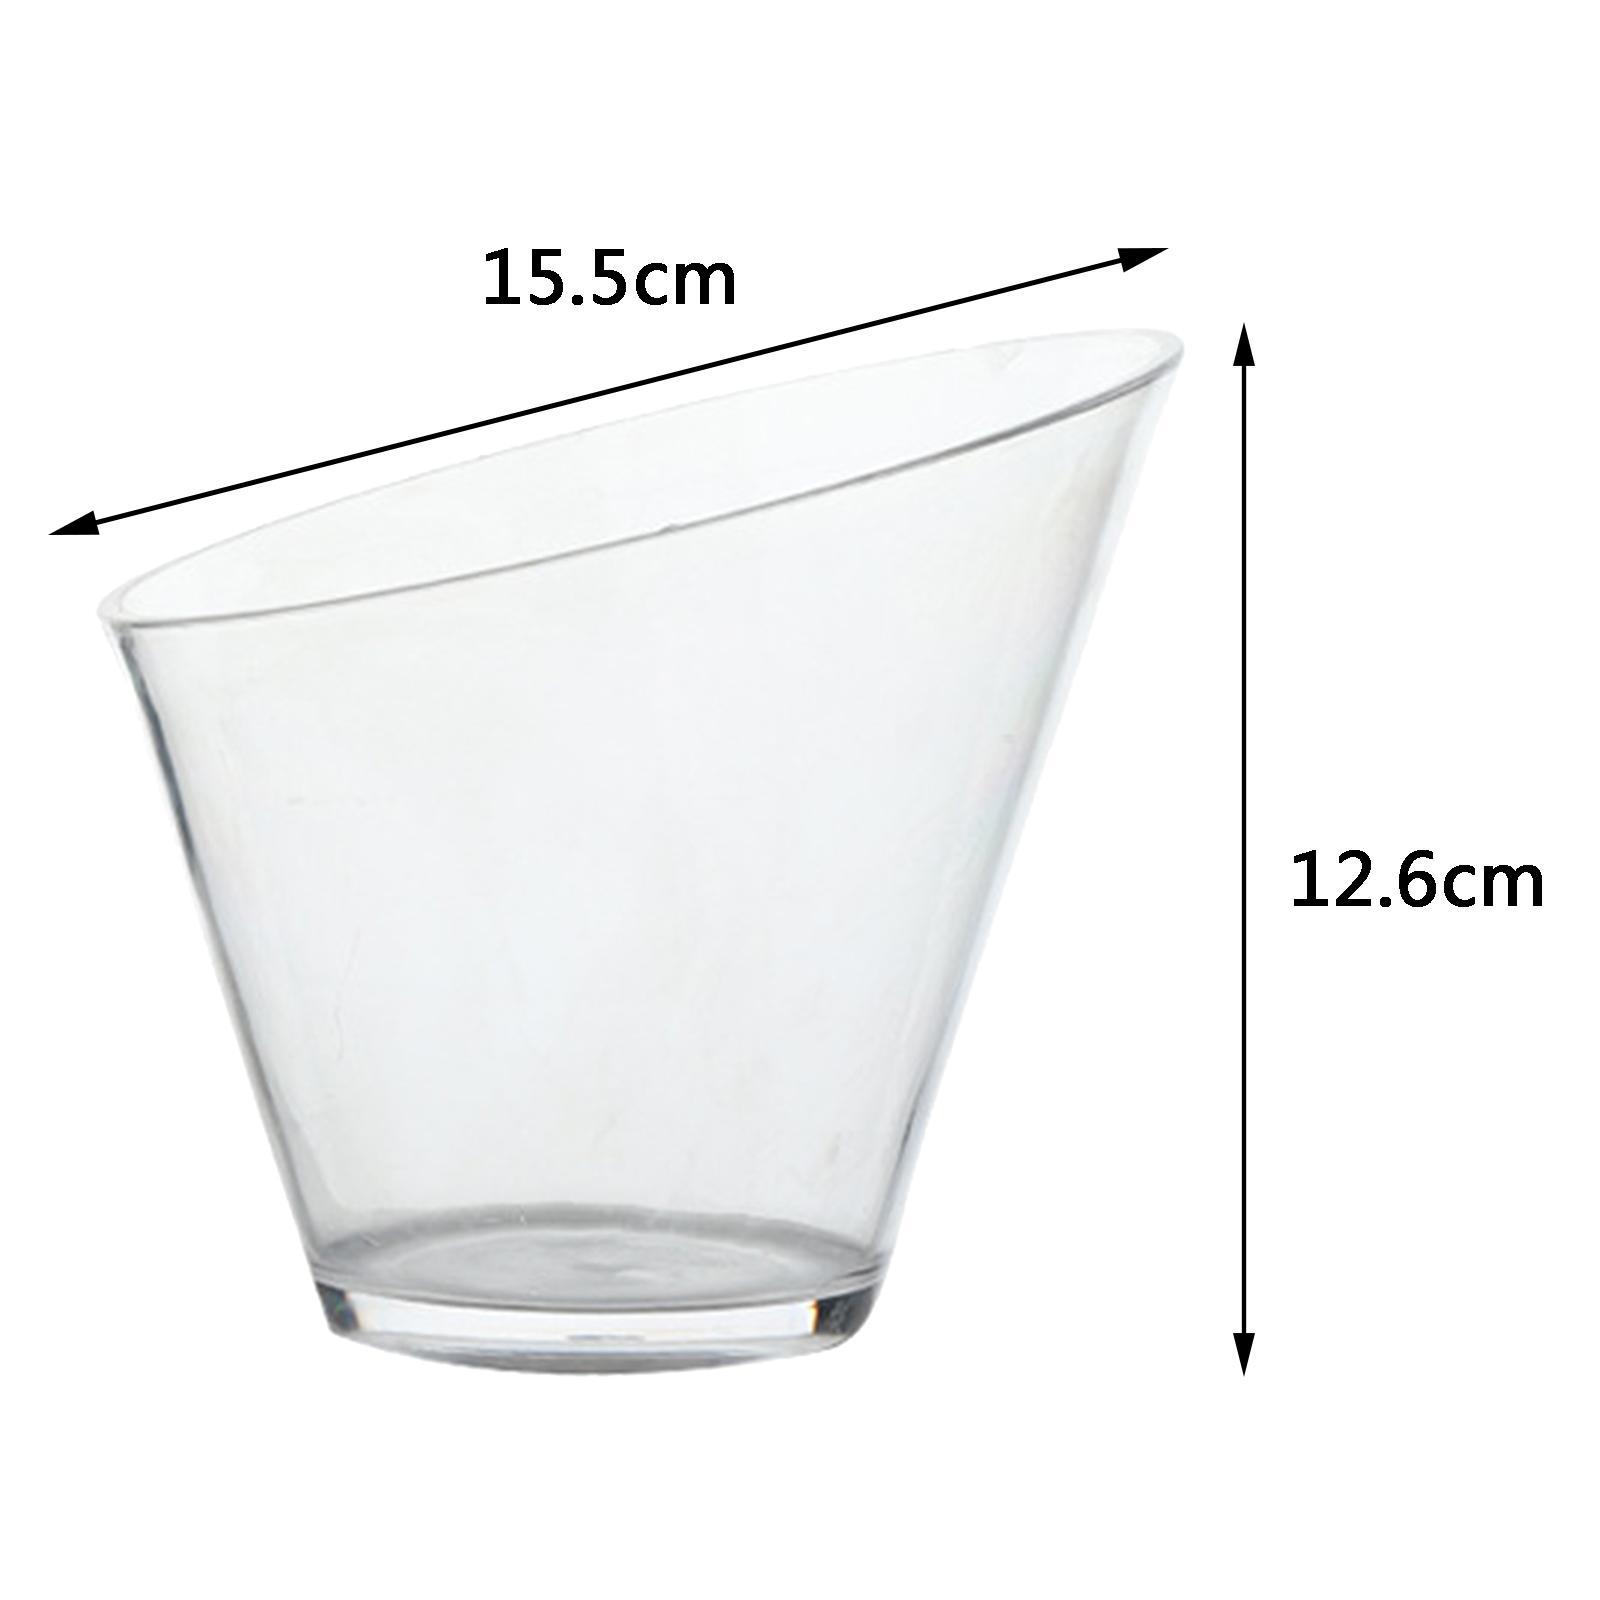 2x Clear Acrylic Salad Bowl Angled Light Weight for Appetizer Family Party